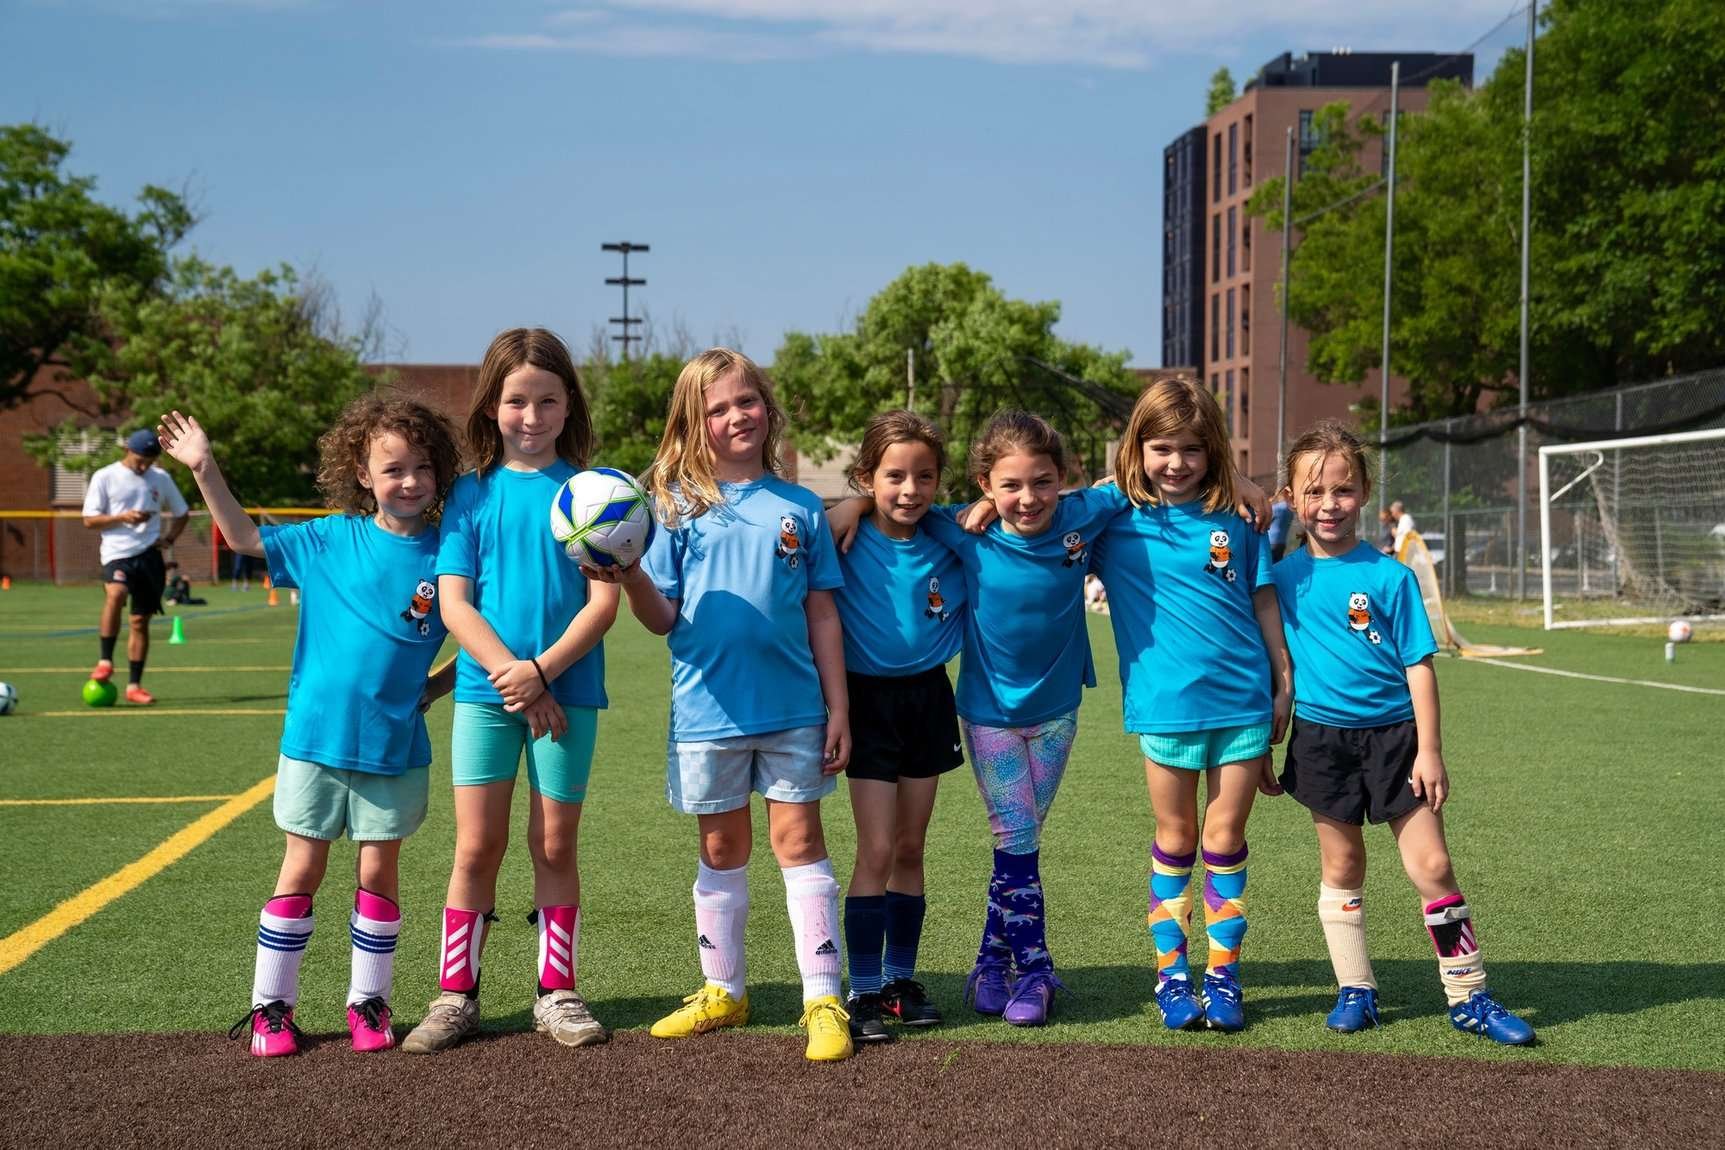 Dc-way-soccer-club-for-kids-in-washington-dc-capitol-hill-league-at-brentwood-hamilton-park-06-03-2023 0009.jpg